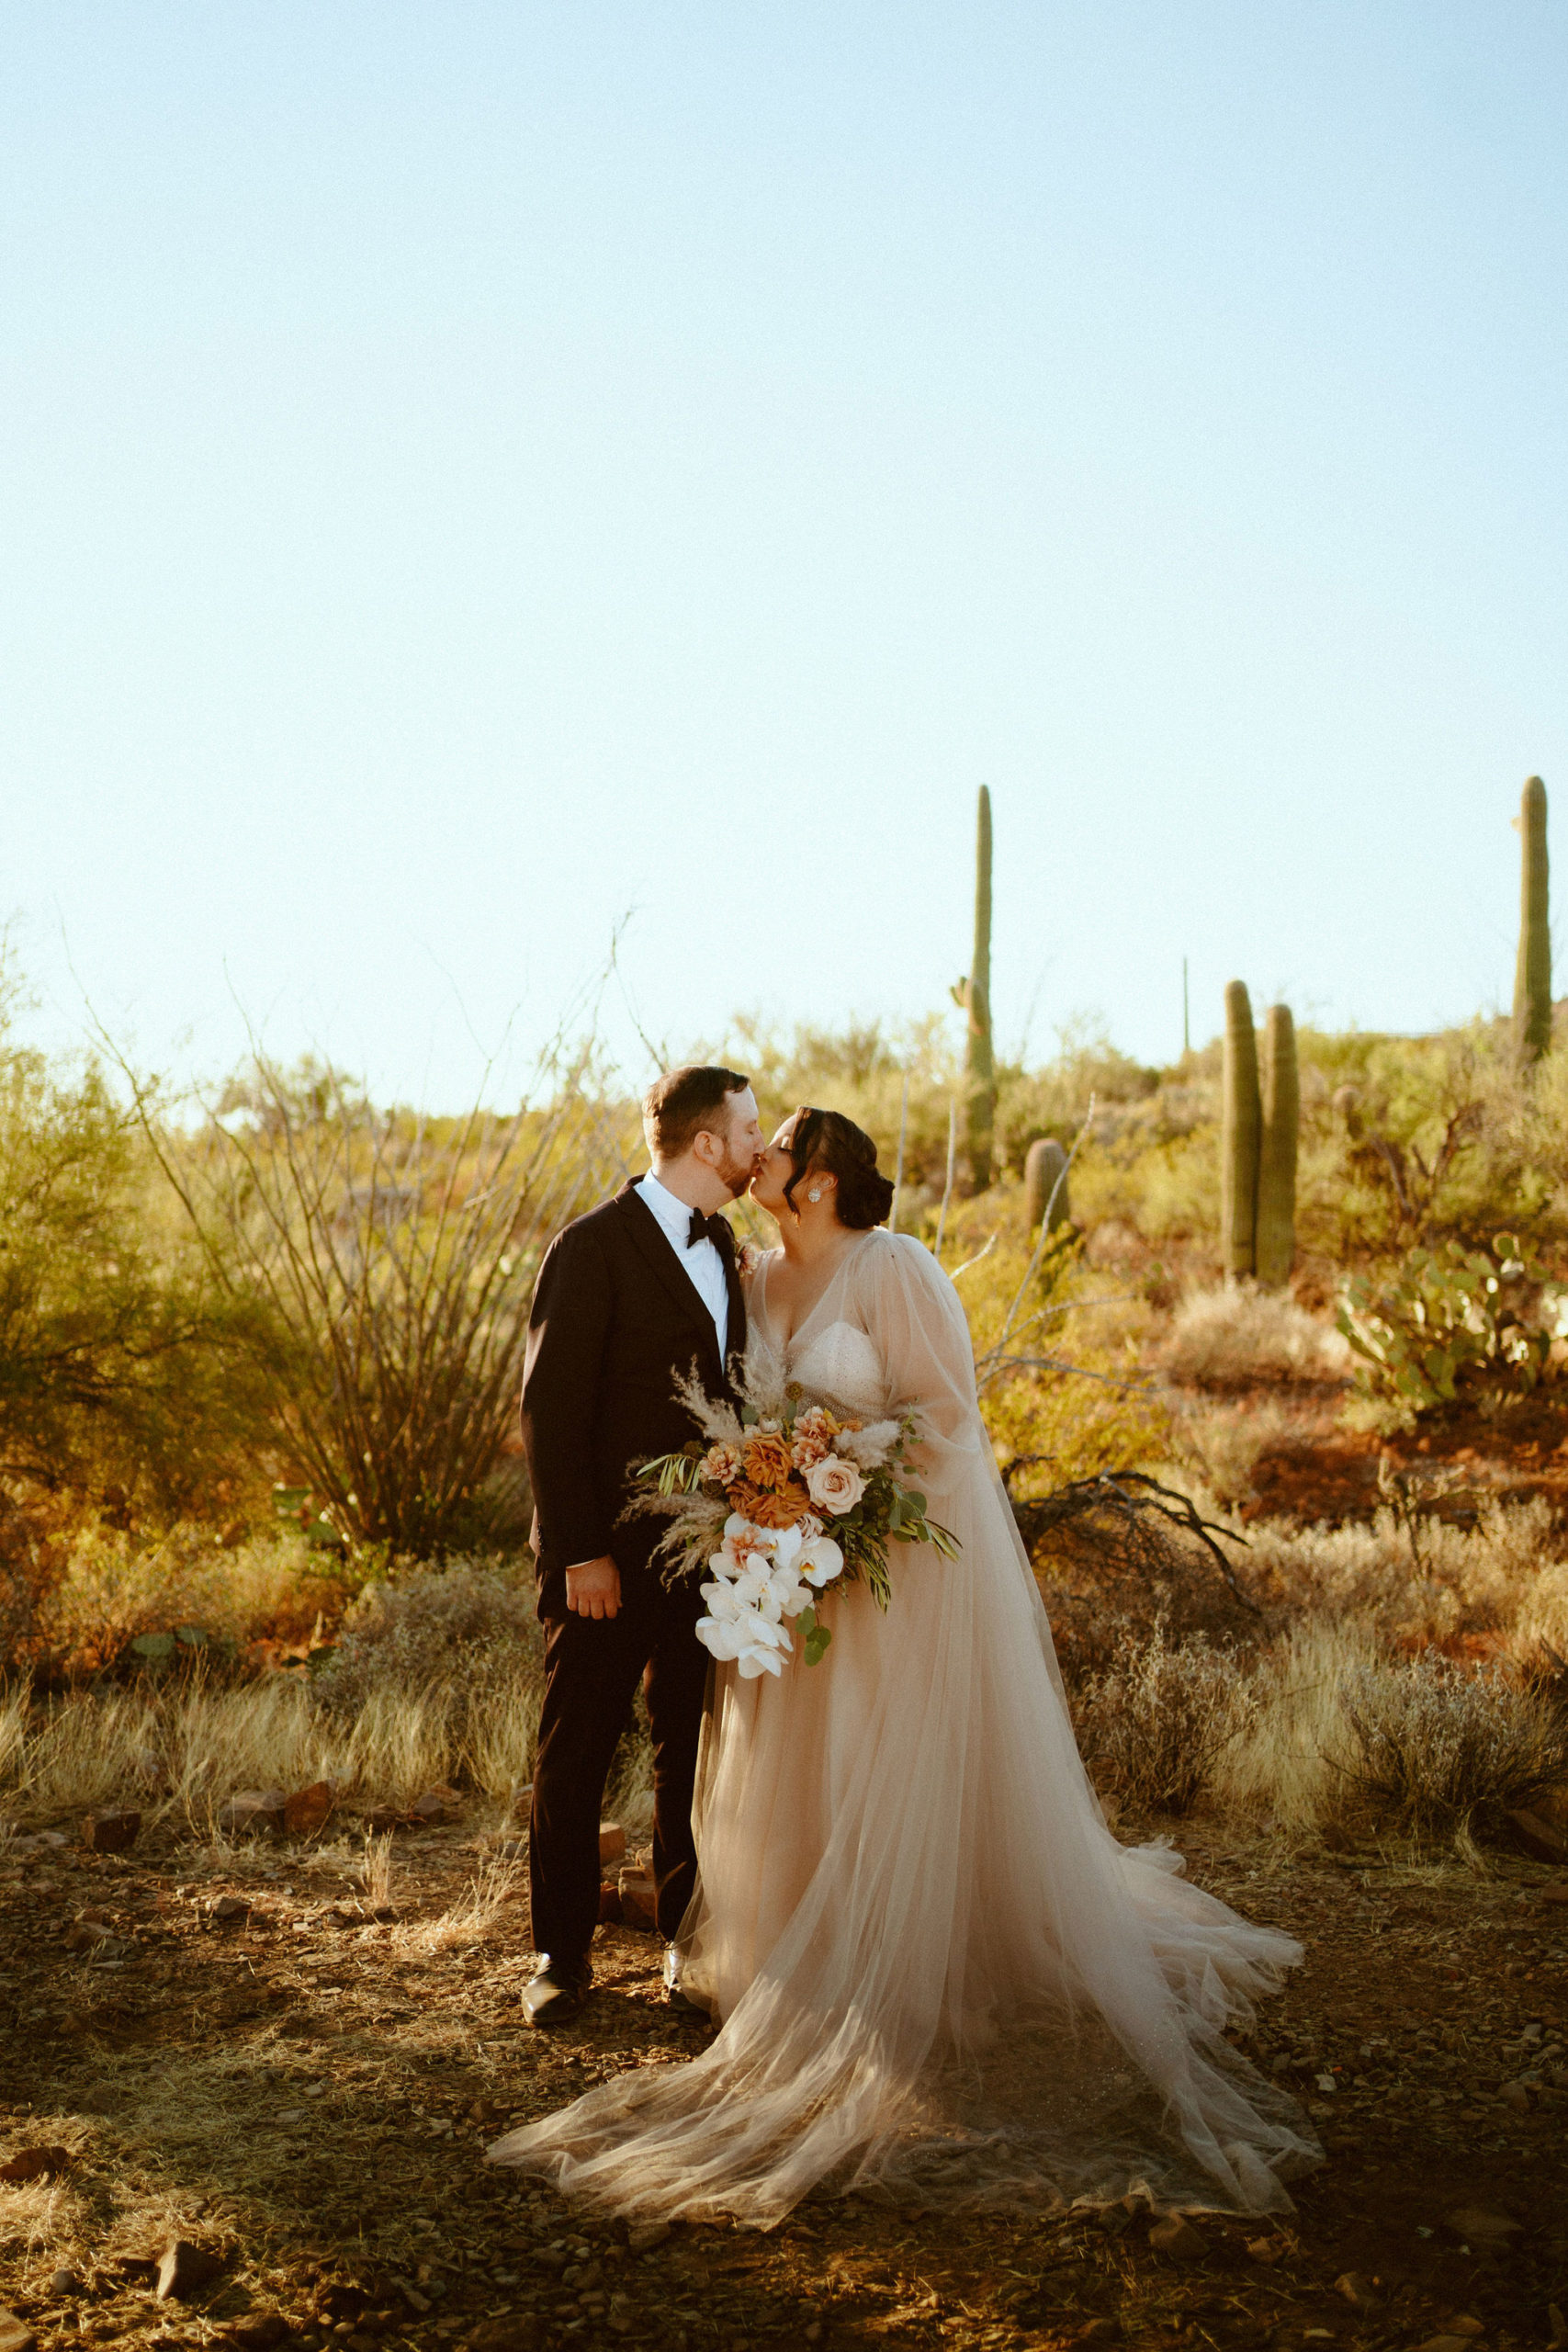 Saguaro National Park Micro-Wedding. The happy newlyweds kiss in the middle of the desert